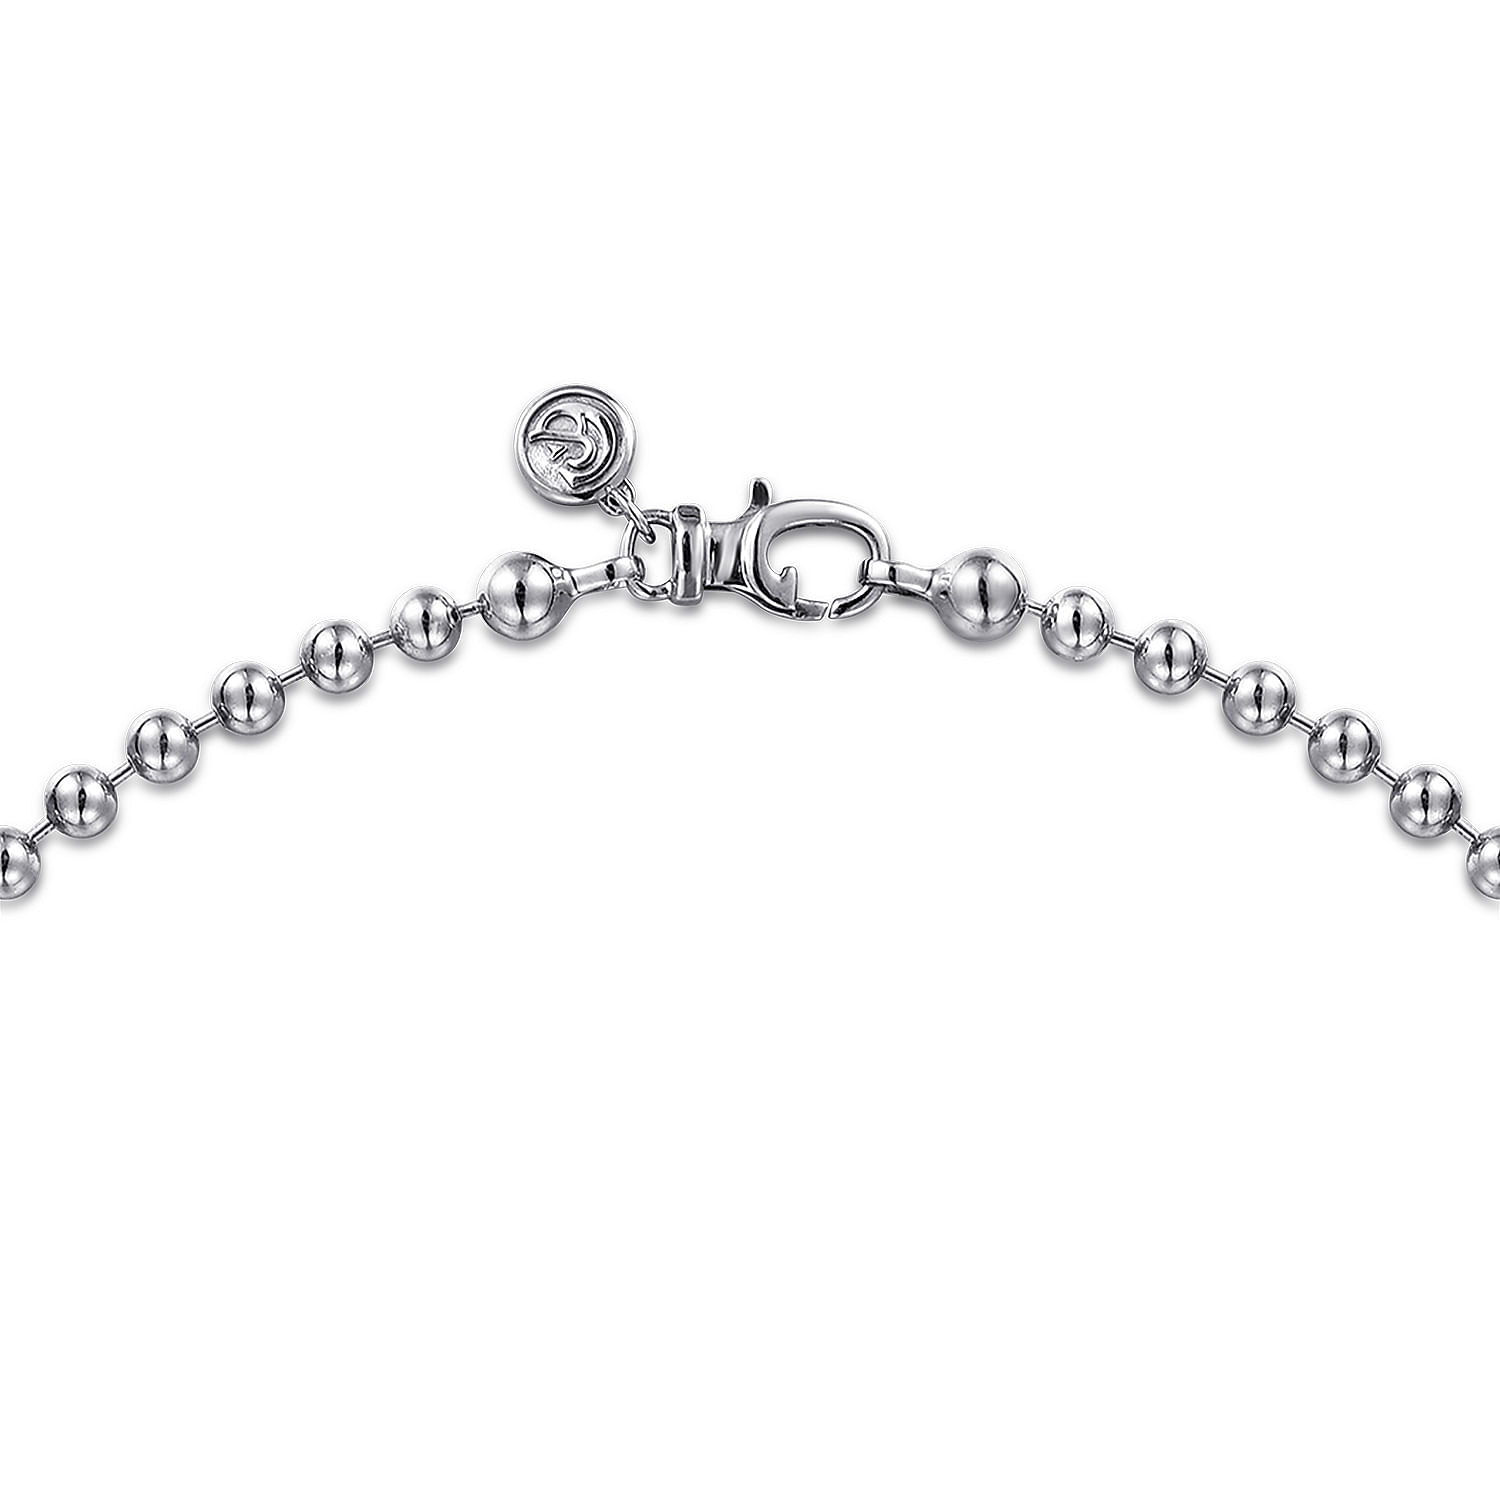 24 Inch 14K White Gold 4mm Ball Chain Necklace